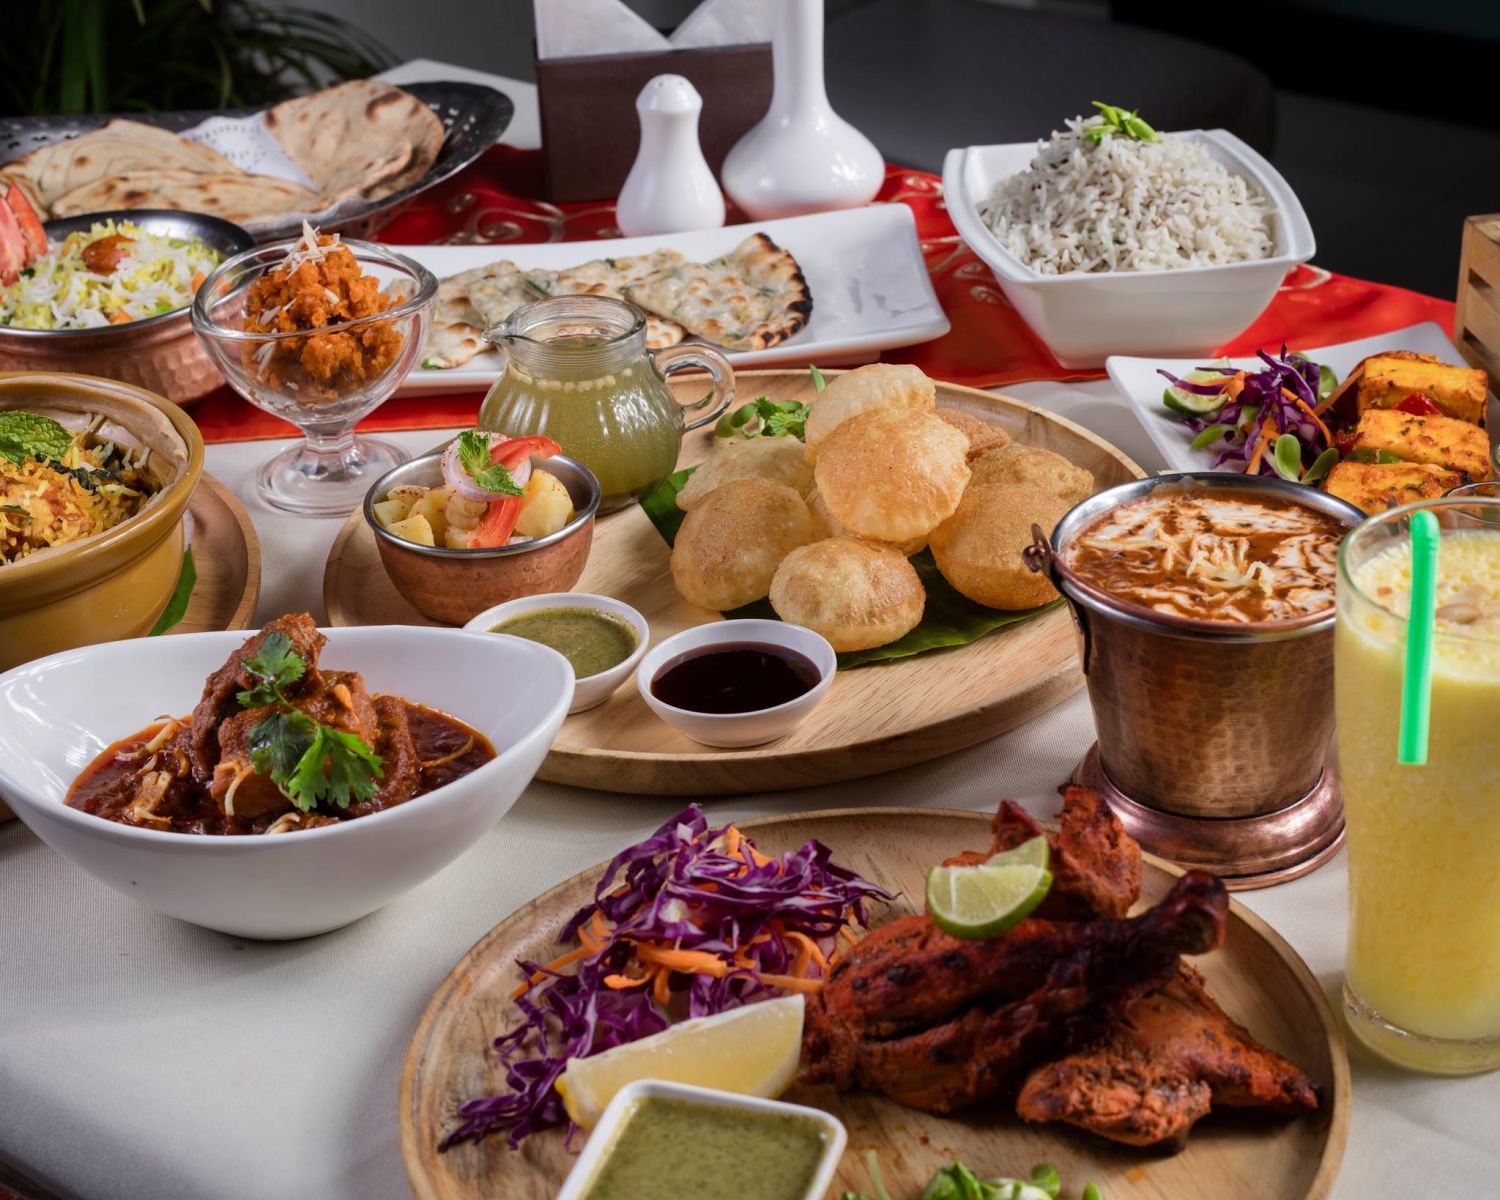 Elite Plus Magazine | 5 Must - Try Indian Restaurants During Covid-19